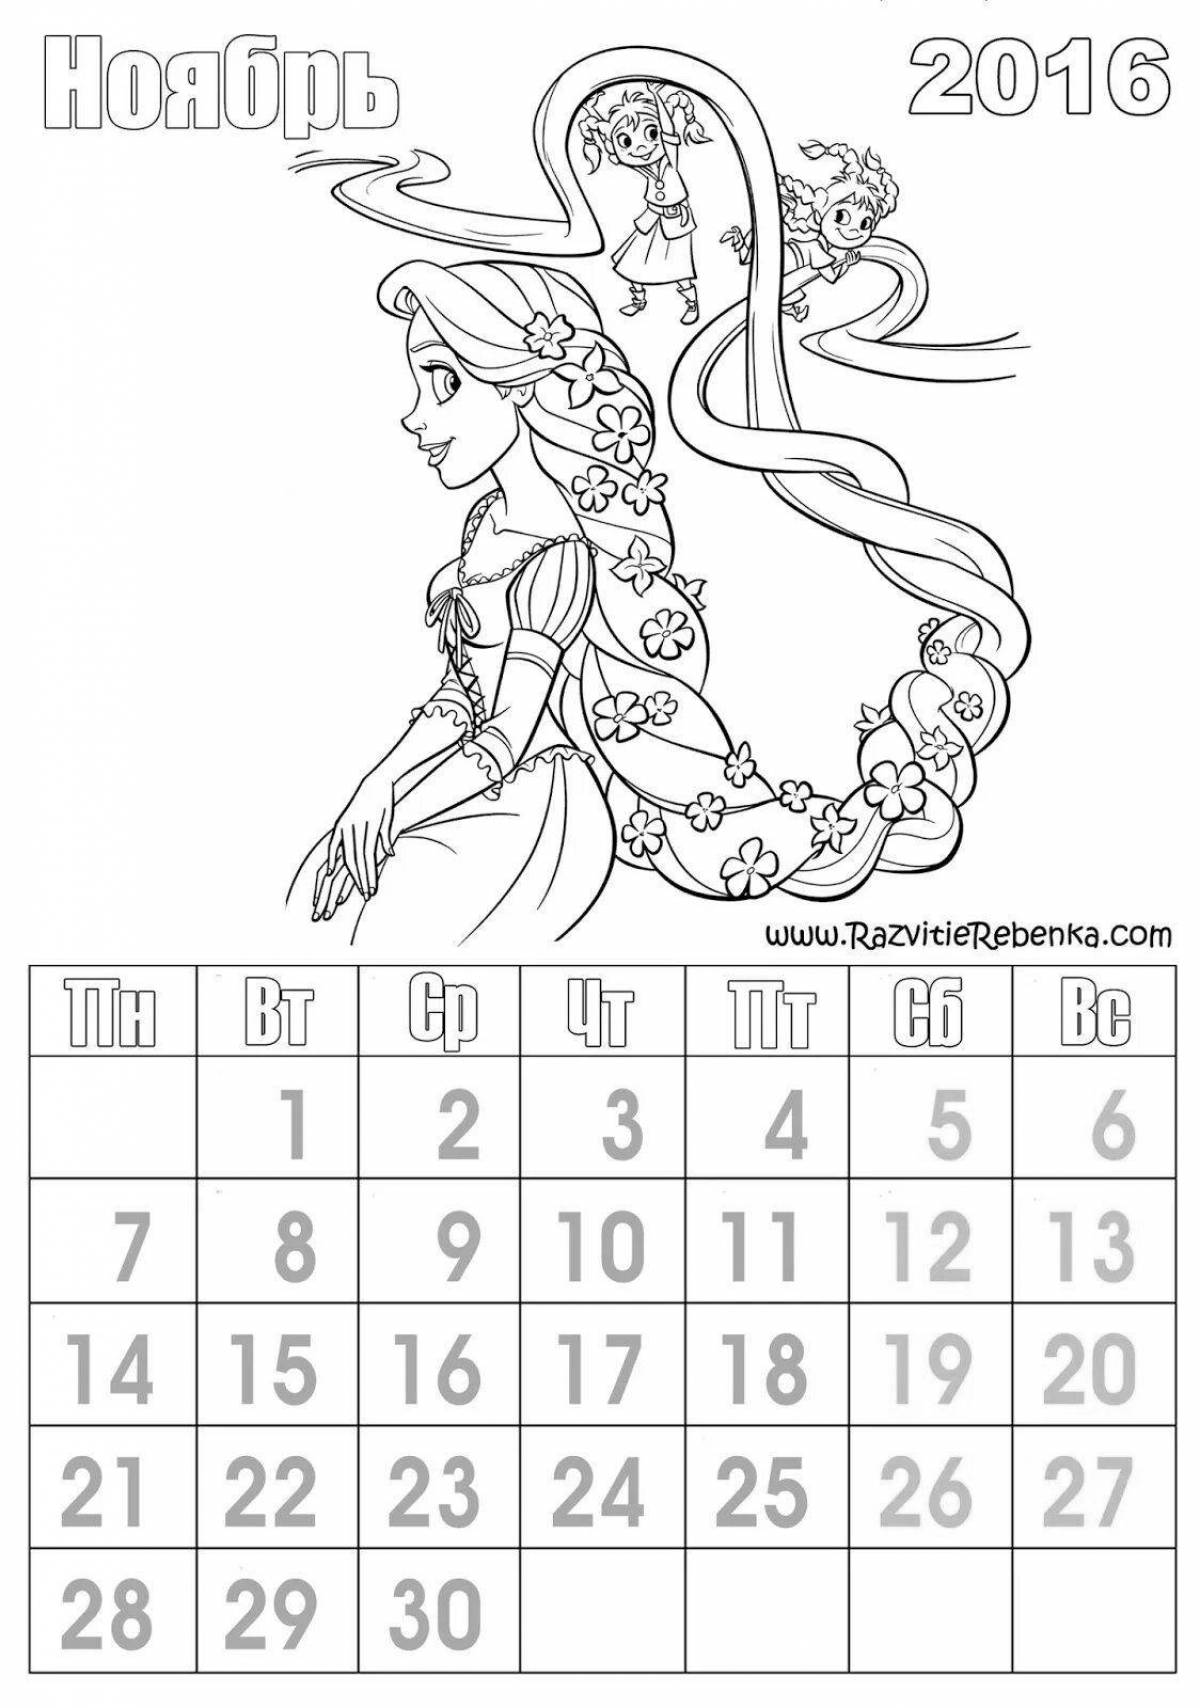 Colorful coloring calendar for kids